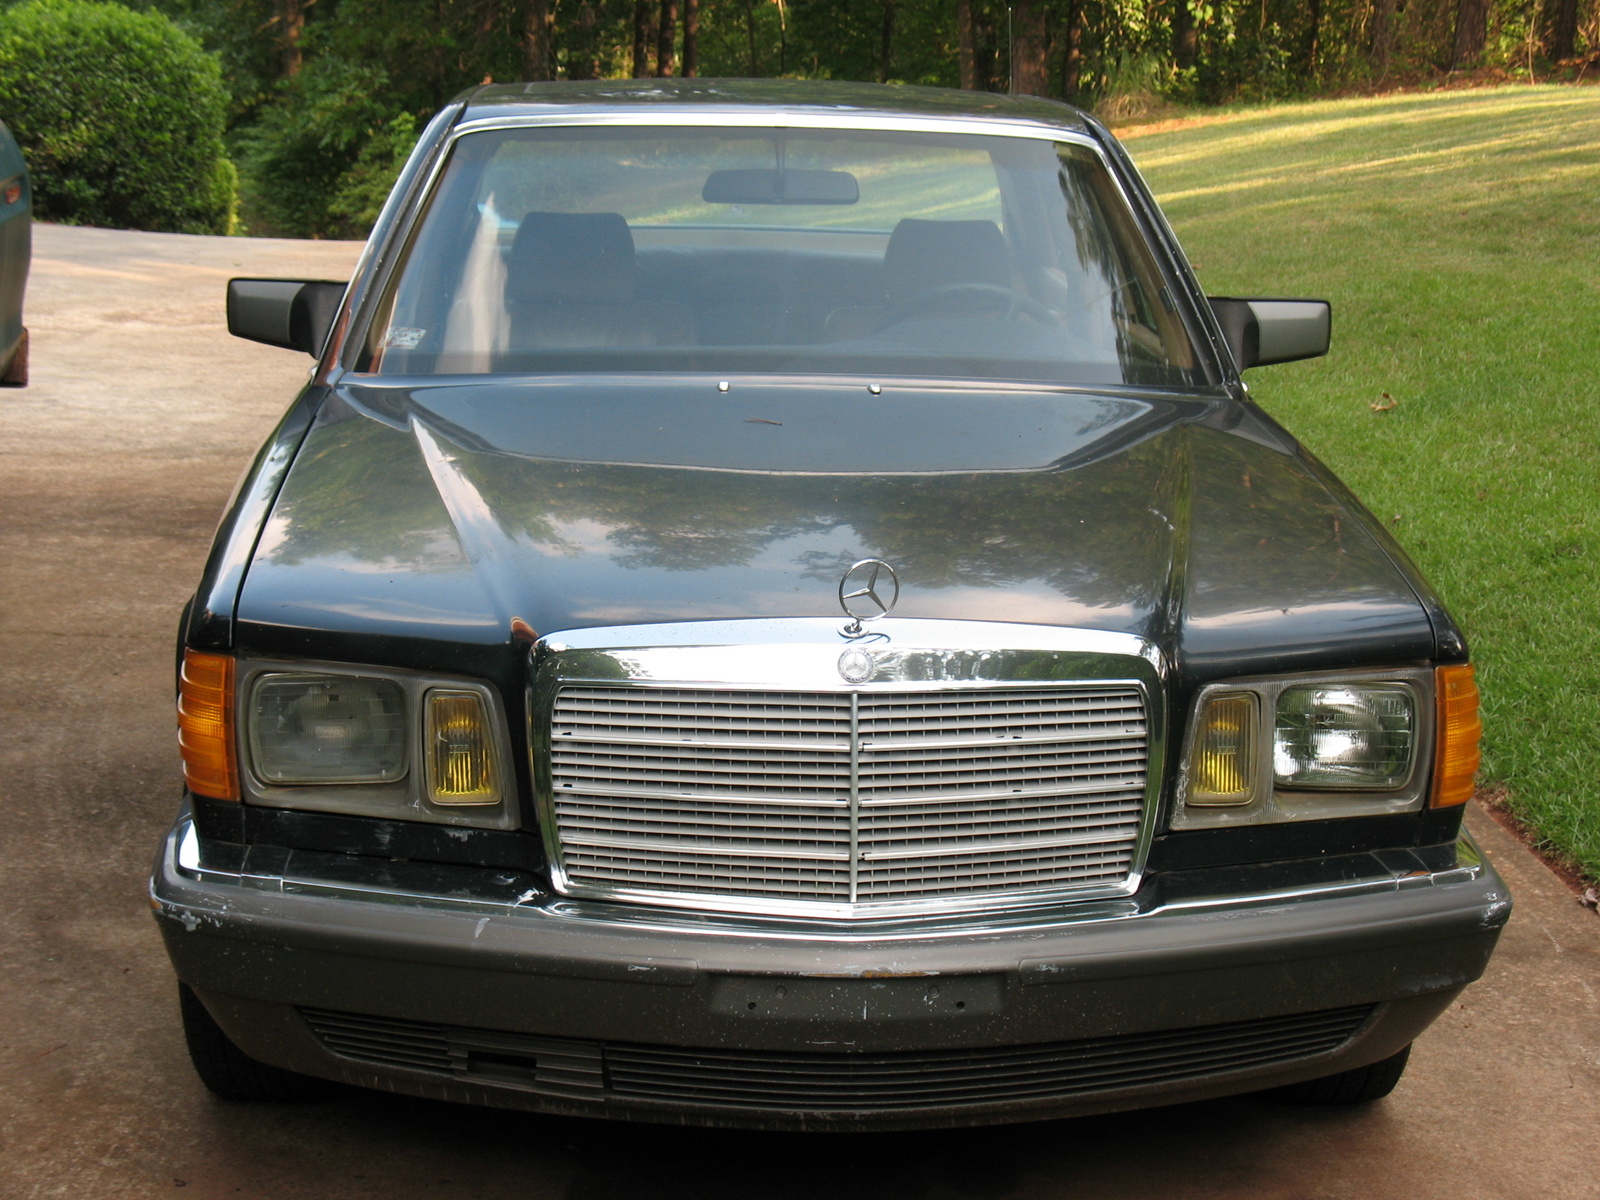 1983 Mercedes 300td wagon review #5